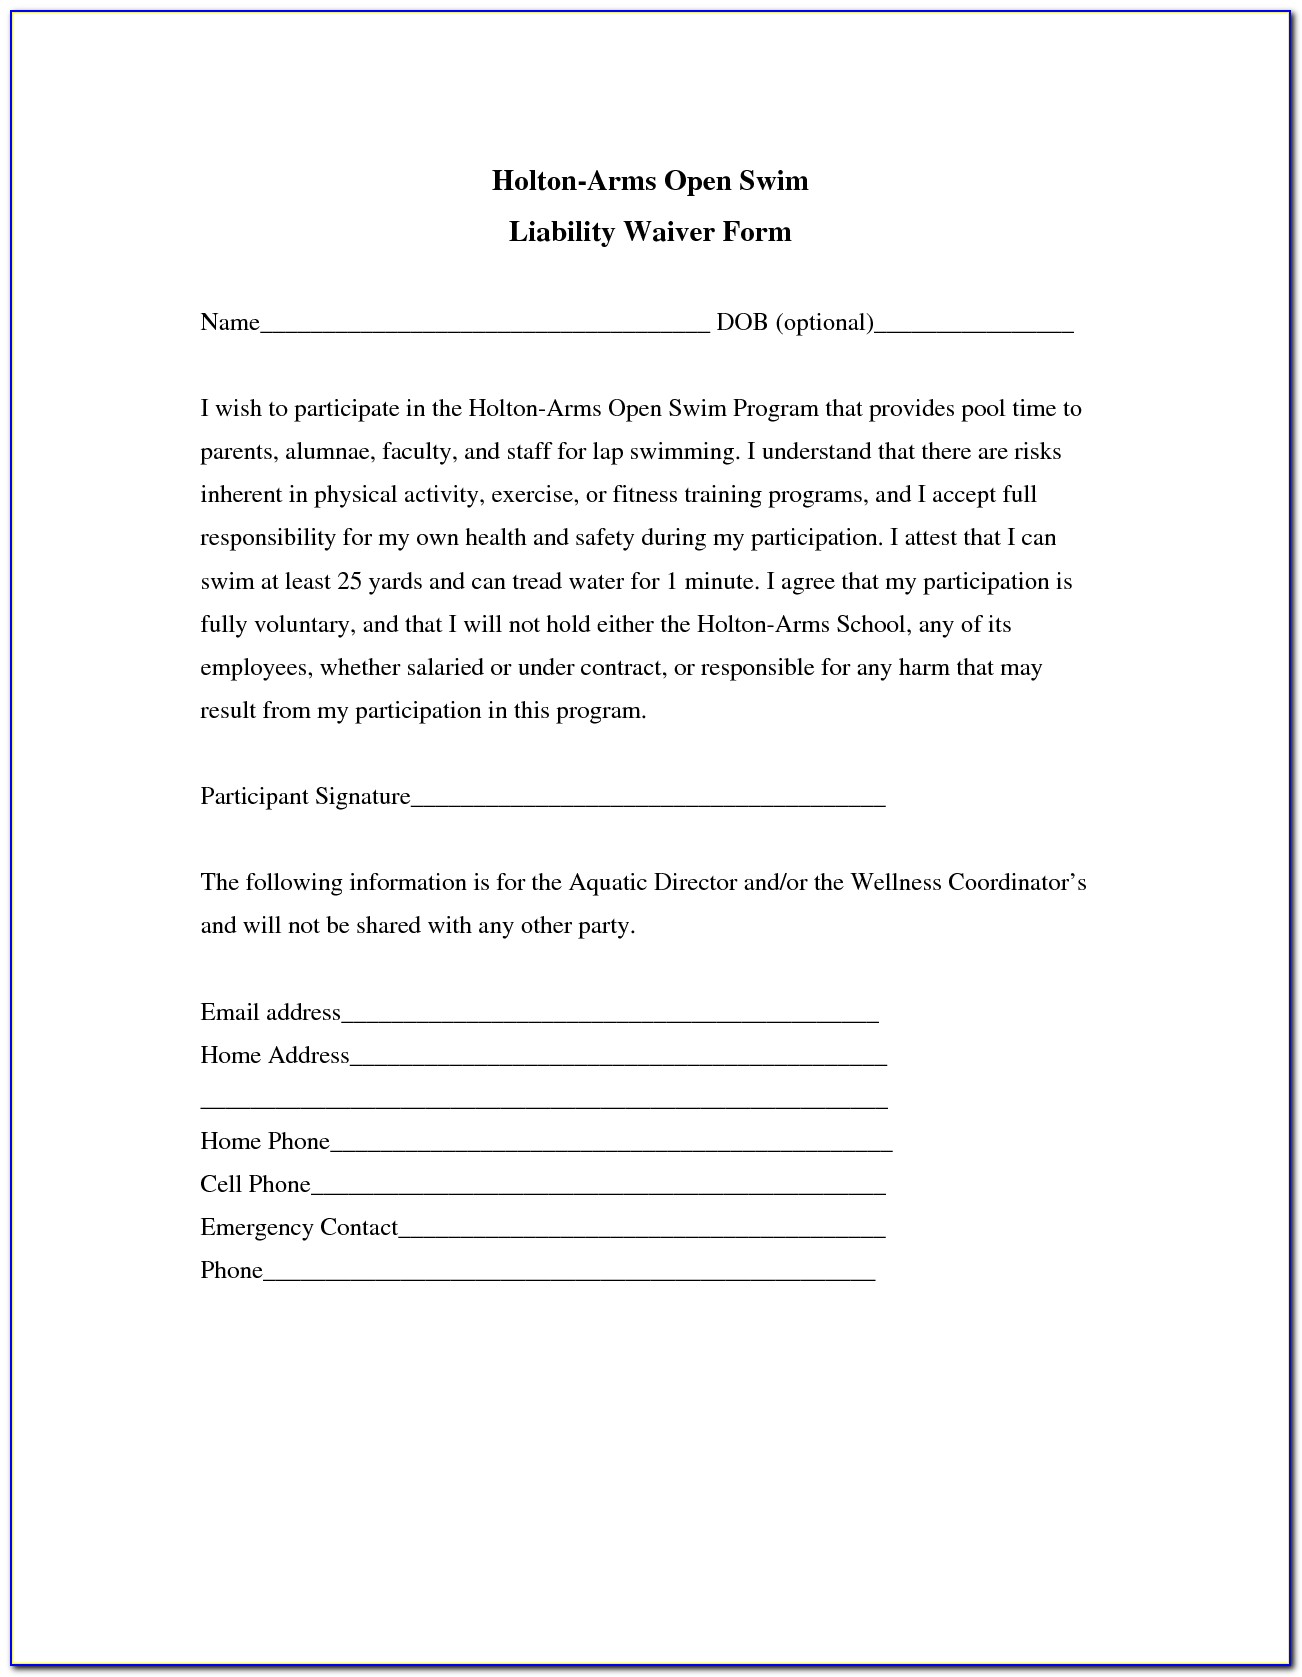 sample-release-of-liability-waiver-form